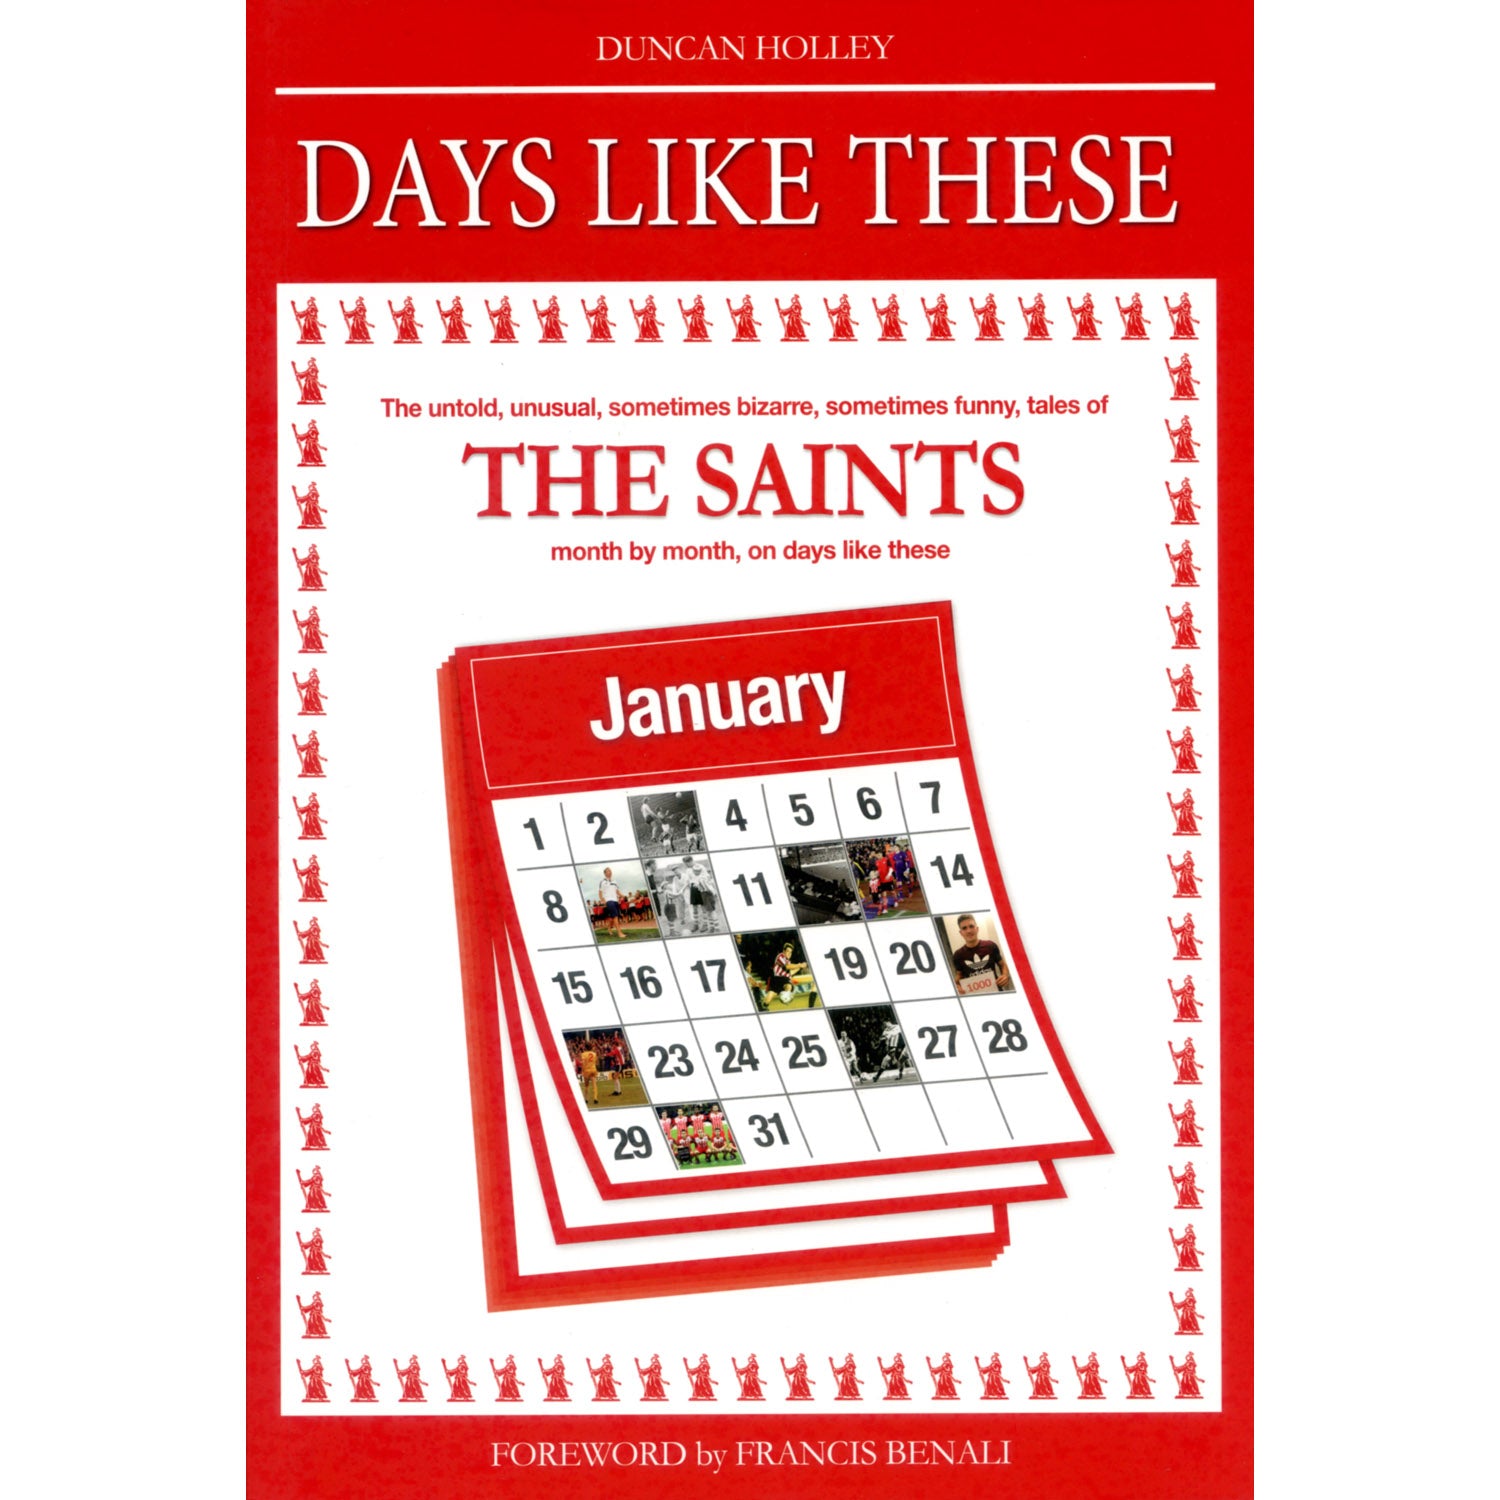 Days Like These – The untold, unusual, sometimes bizarre, sometimes funny, tales of The Saints